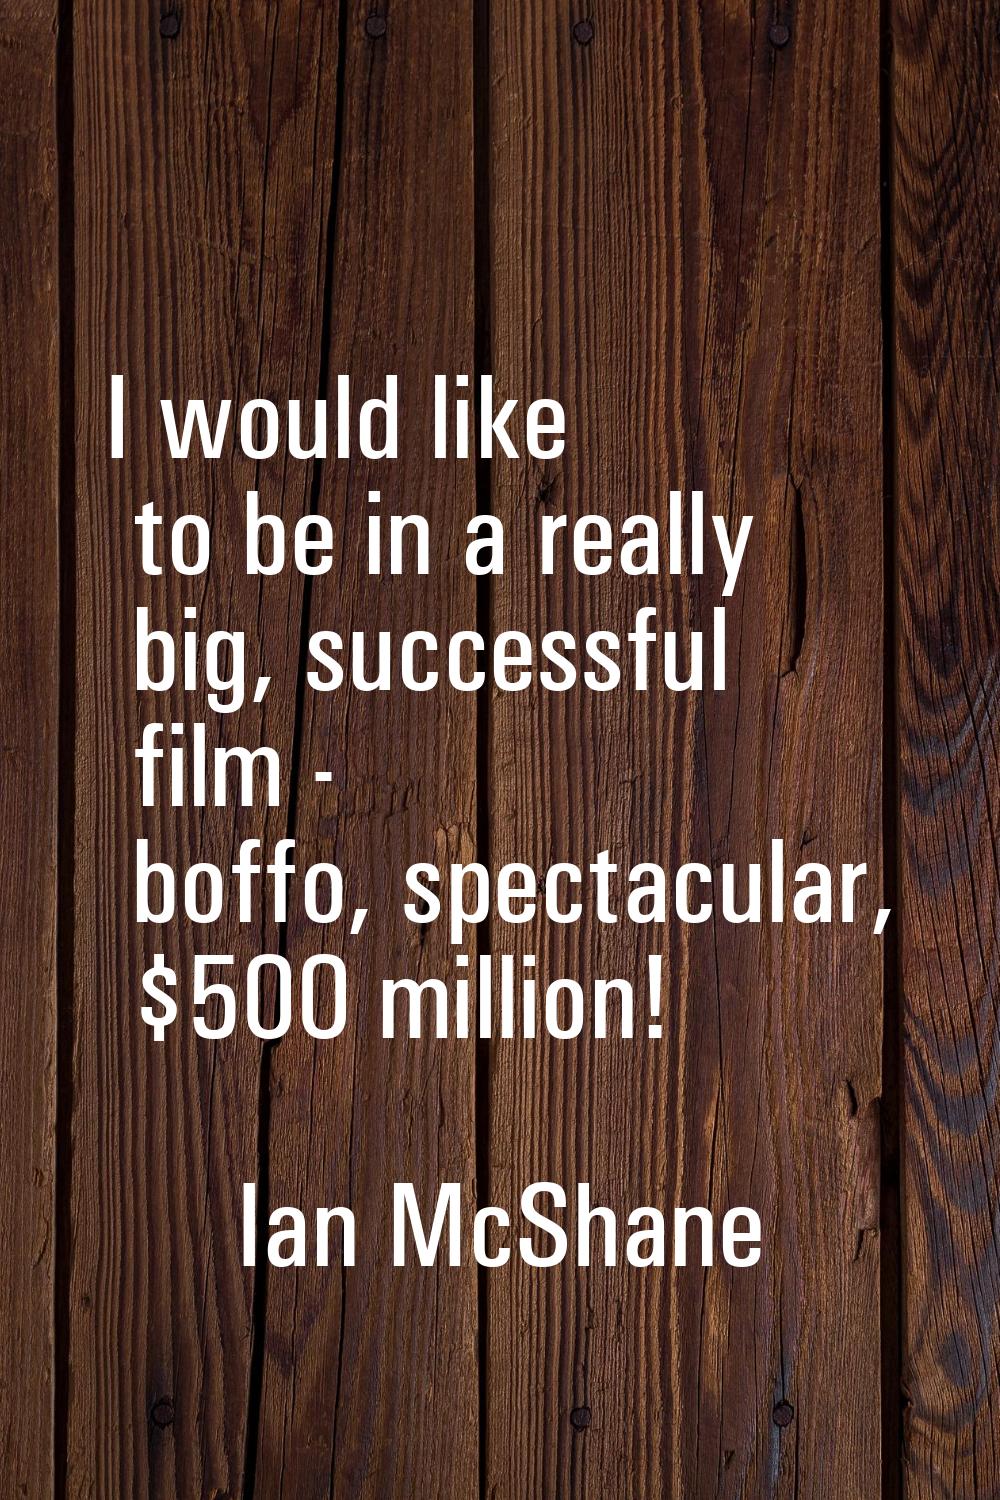 I would like to be in a really big, successful film - boffo, spectacular, $500 million!